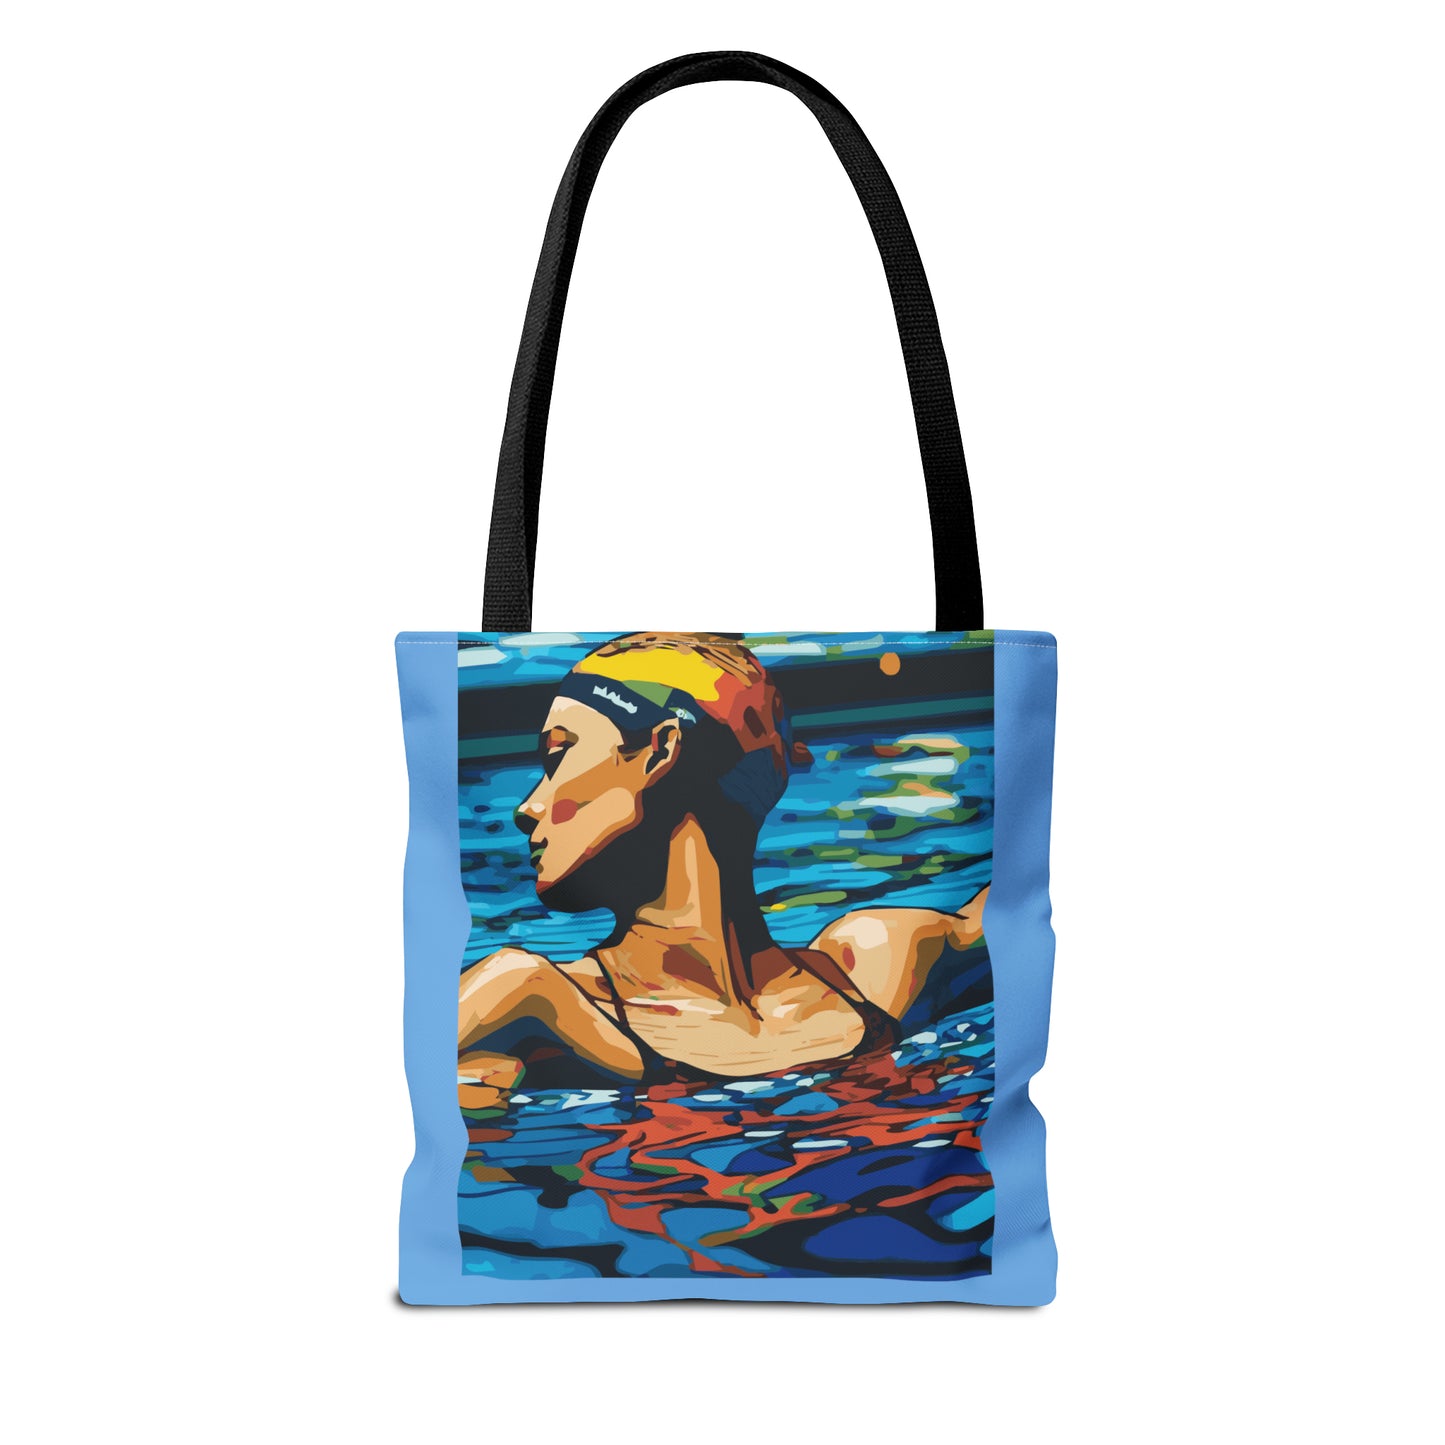 Swim with her Tote Bag